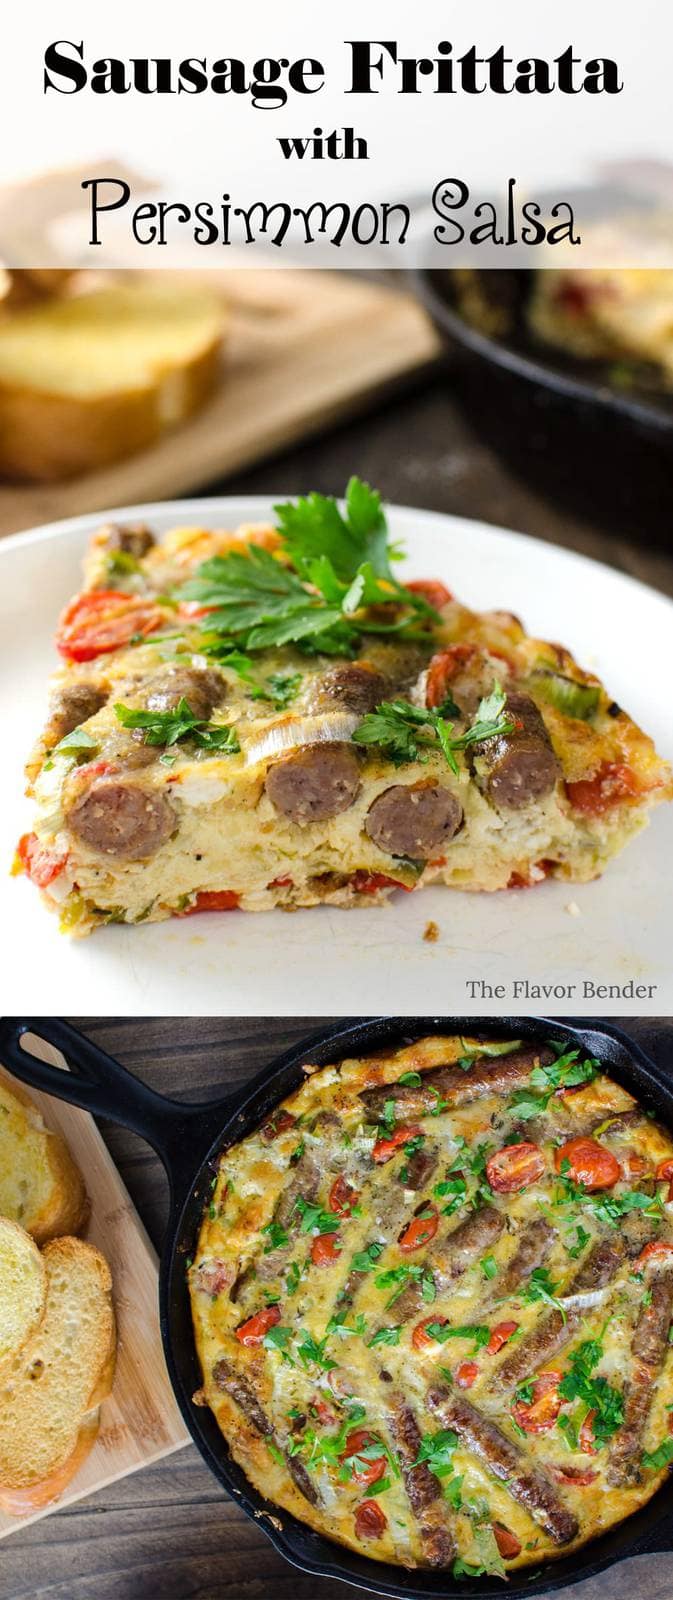 Sausage Frittata with Persimmon Salsa - This Sausage and Bucheron goat cheese studded Frittata with Persimmon Salsa is quick, easy, nutritious and oh so tasty!